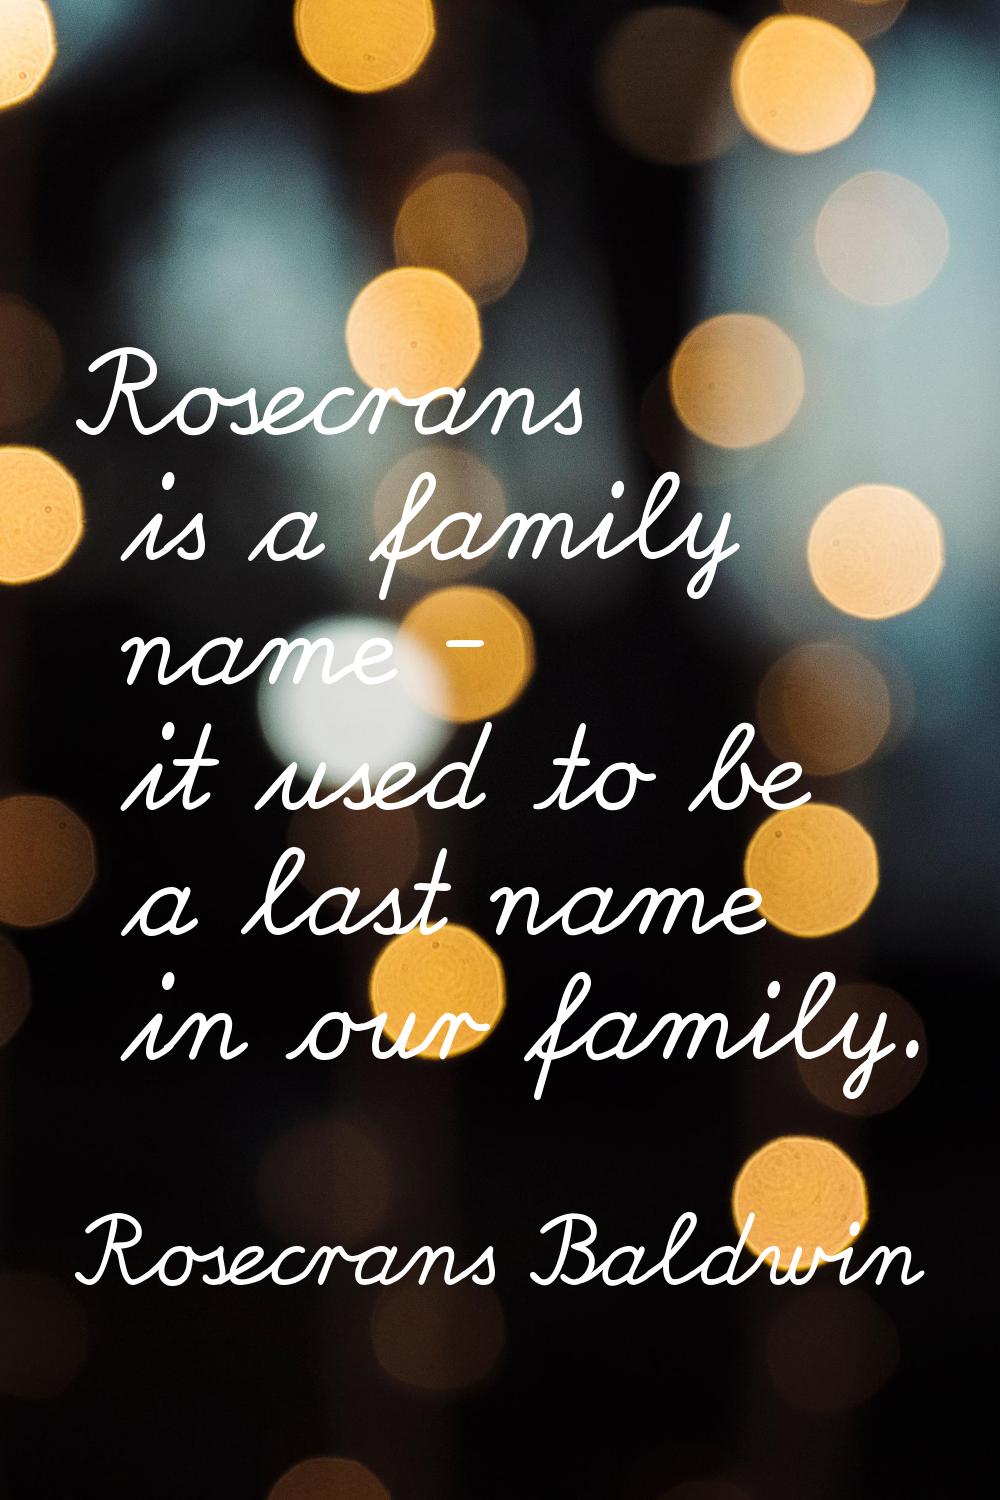 Rosecrans is a family name - it used to be a last name in our family.